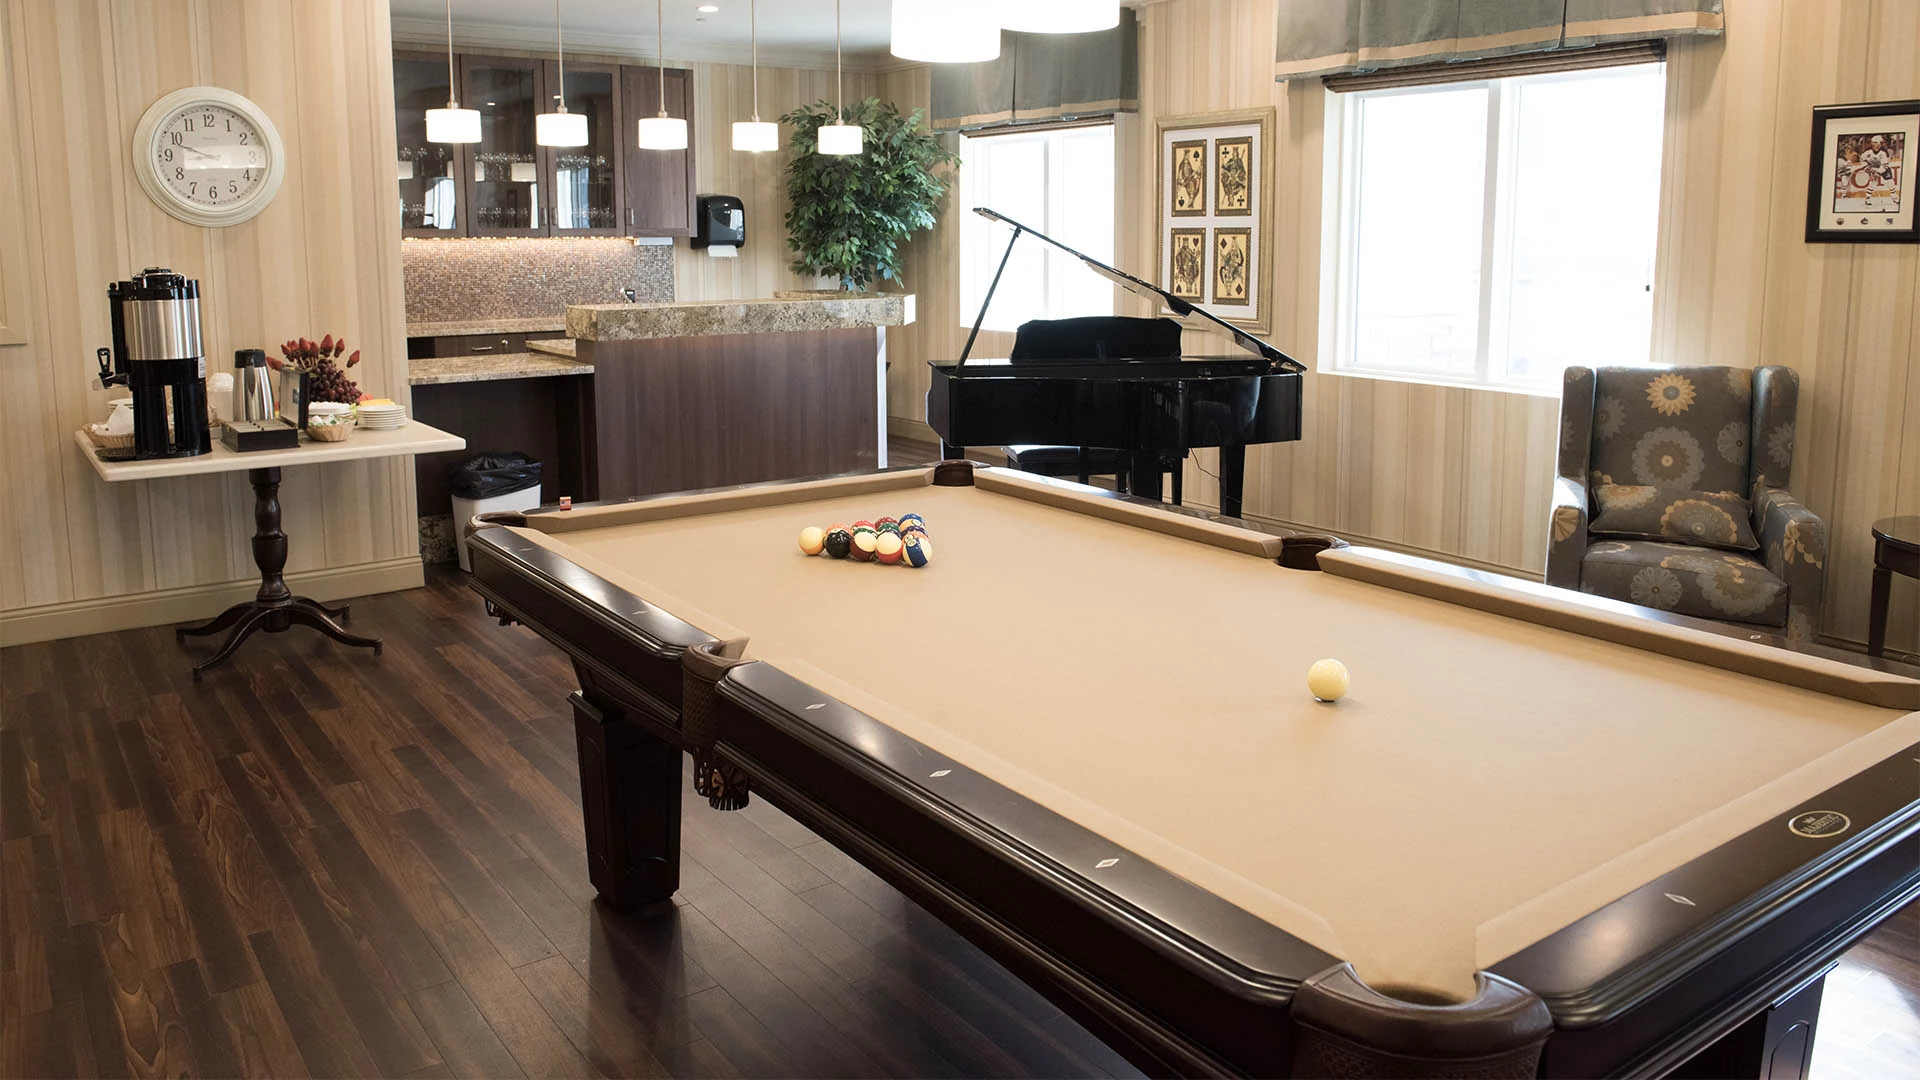 Game room with pool table, grand piano and coffee bar at MacTaggart Place retirement home